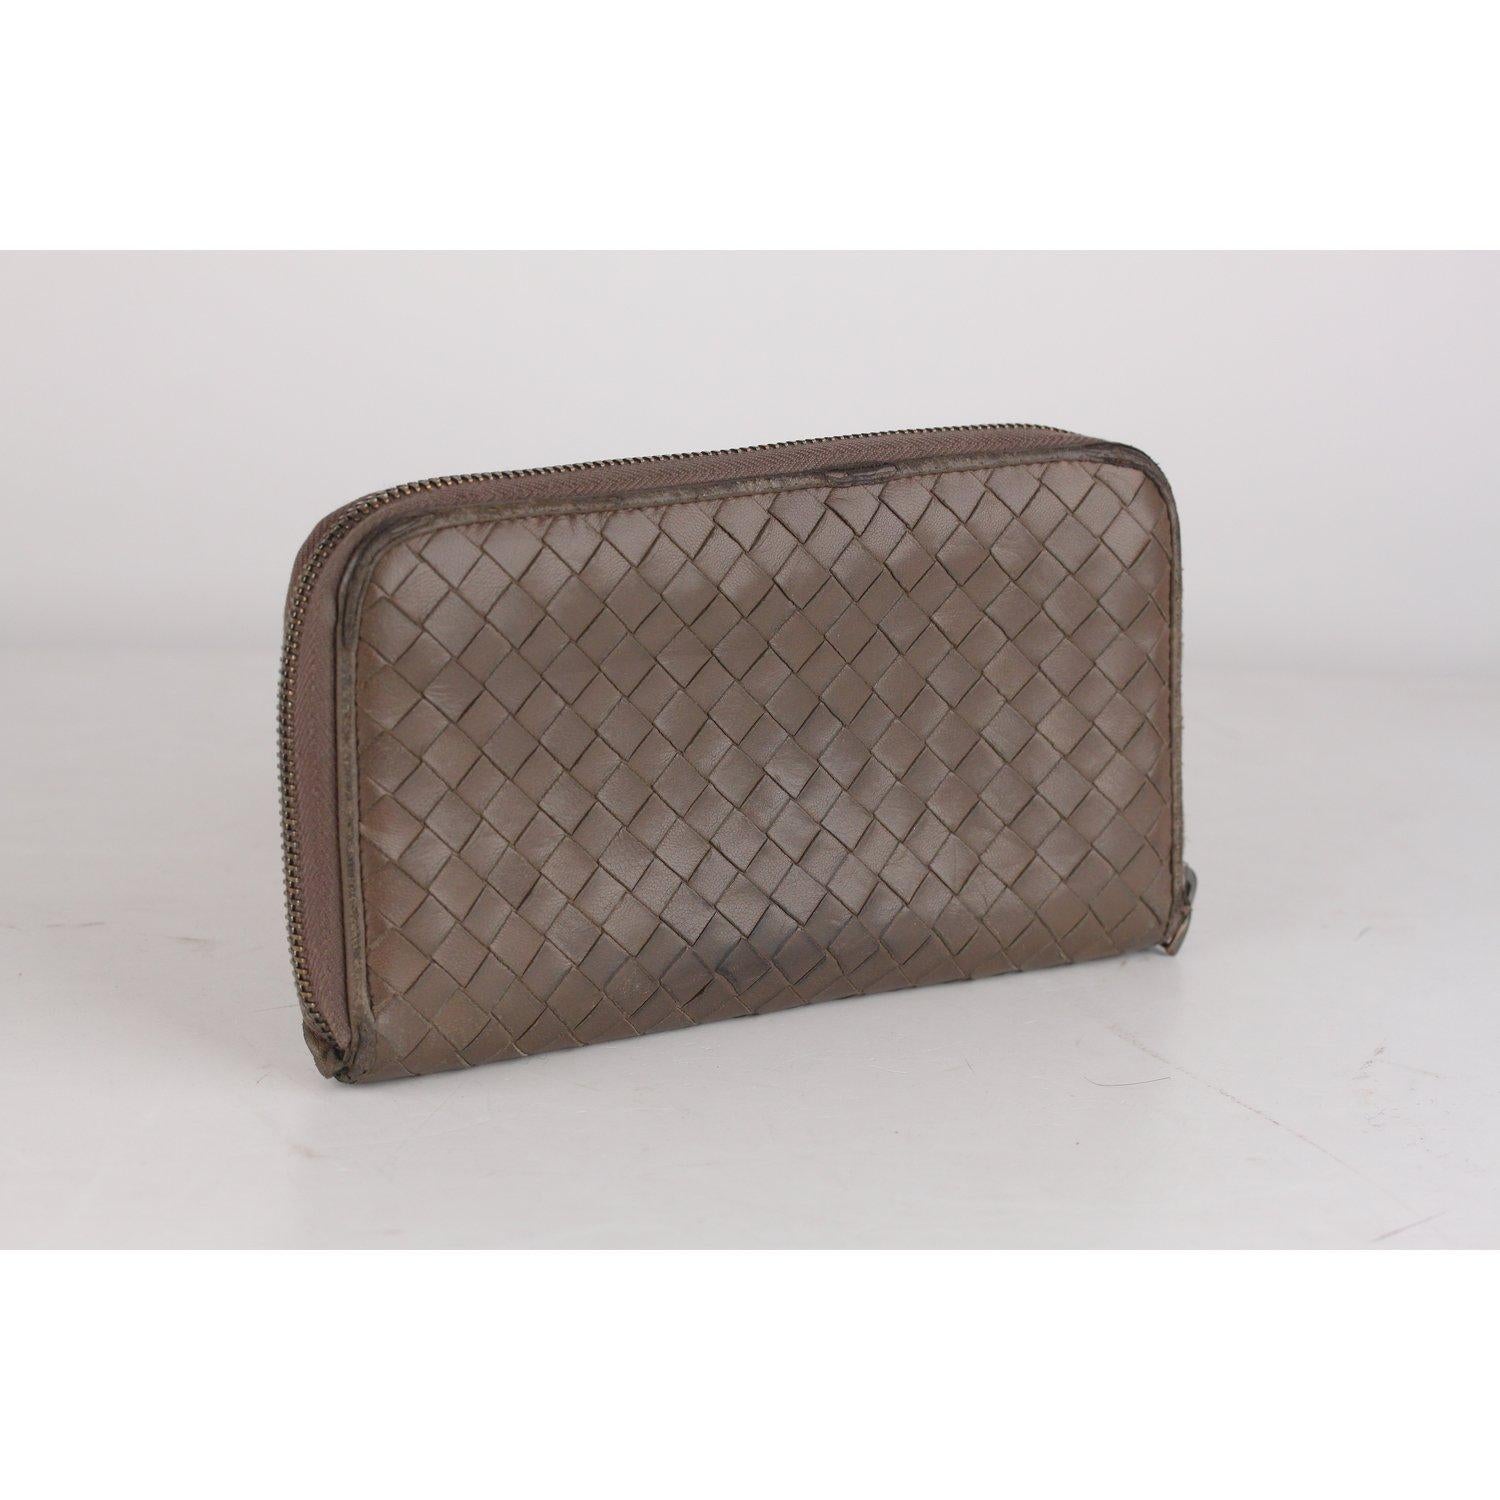 MATERIAL: Leather COLOR: Taupe MODEL: Continental wallet GENDER: Women SIZE: Medium Condition CONDITION DETAILS: B :GOOD CONDITION - Some light wear of use - Some normal wear of use on leather (especially on corners amd along the edges), some